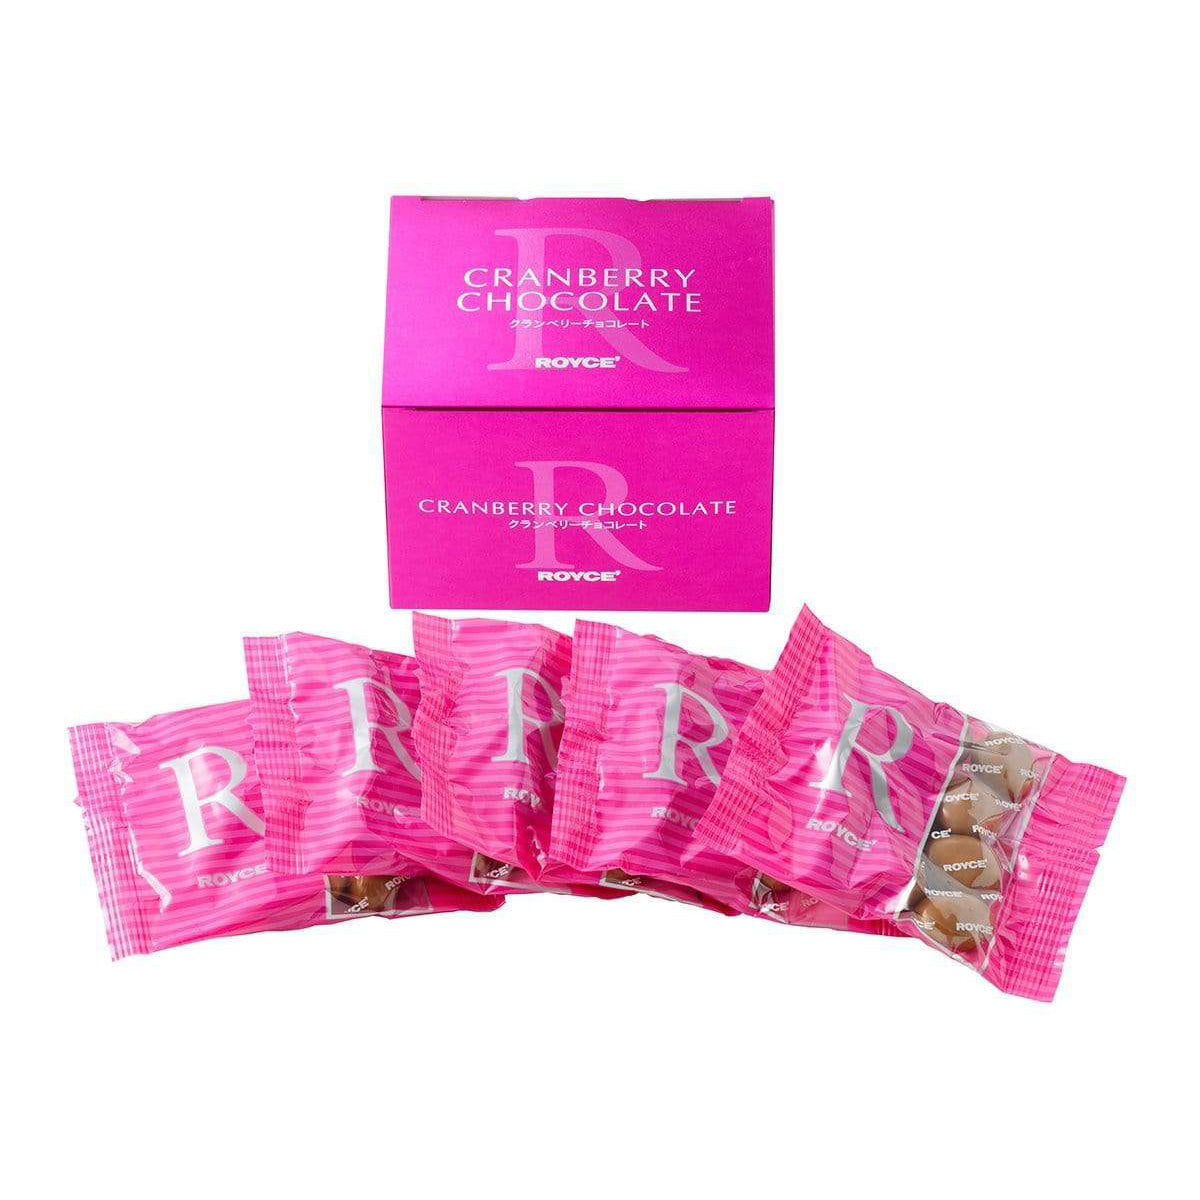 ROYCE' Chocolate - Cranberry Chocolate - Image shows pink box with the words Cranberry Chocolate on top and bottom. Below are five packets with pink stripes and text saying R ROYCE'.